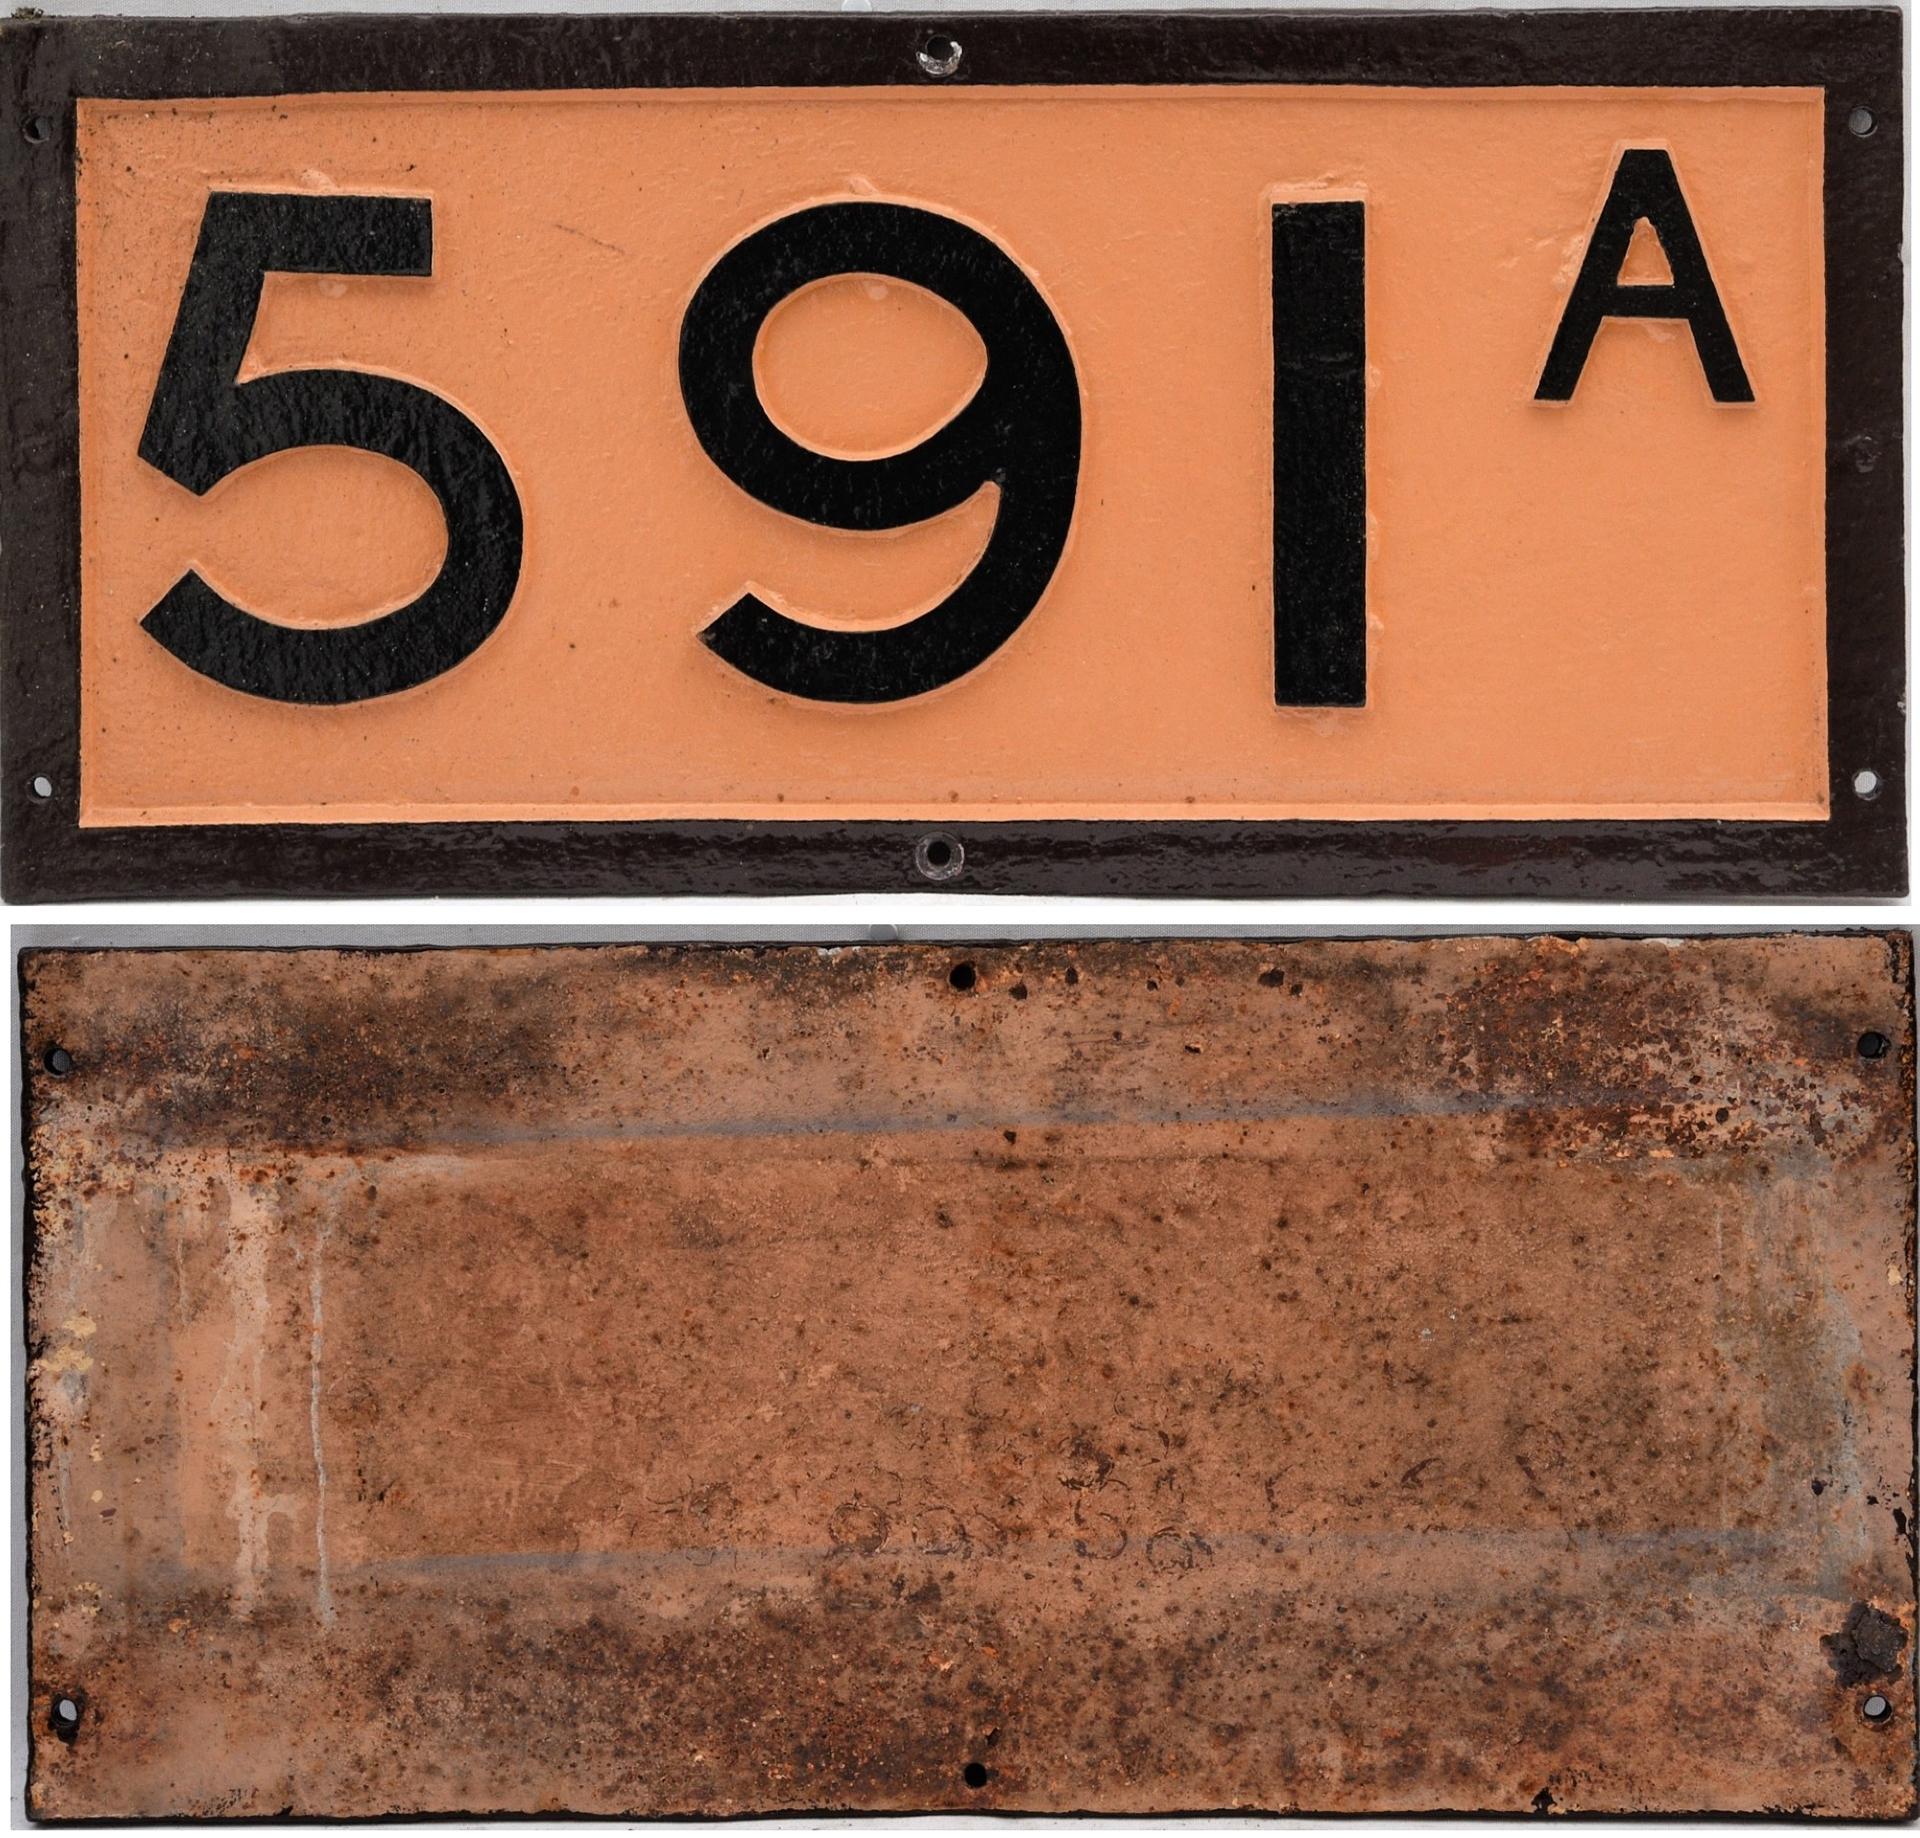 Southern Railway cast iron Bridge Plate 591A. Recovered from NORTH TAWTON STATION. Repainted front